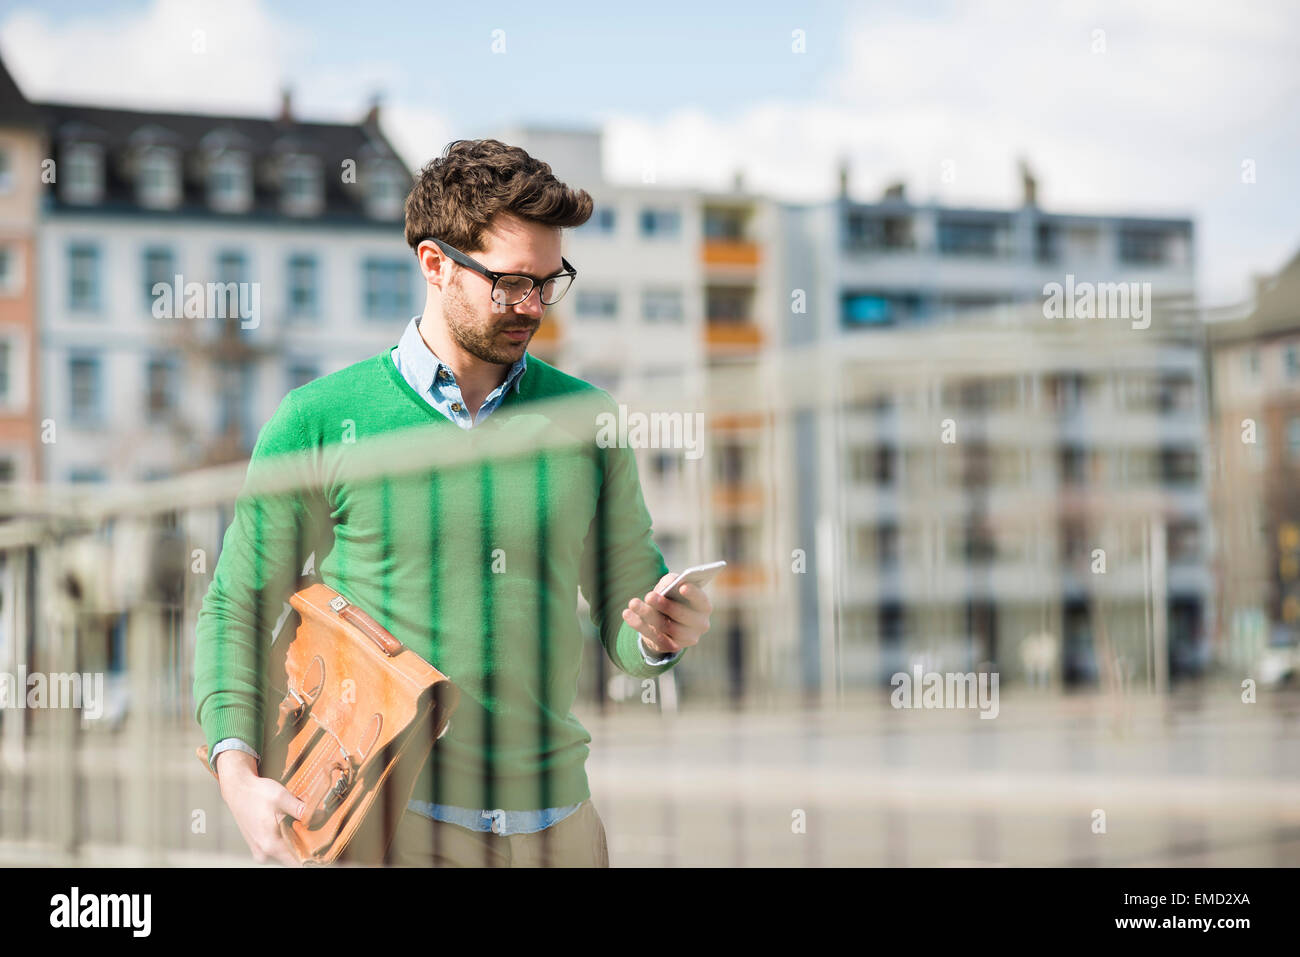 Man in green sweater carrying briefcase, reading text message Stock Photo